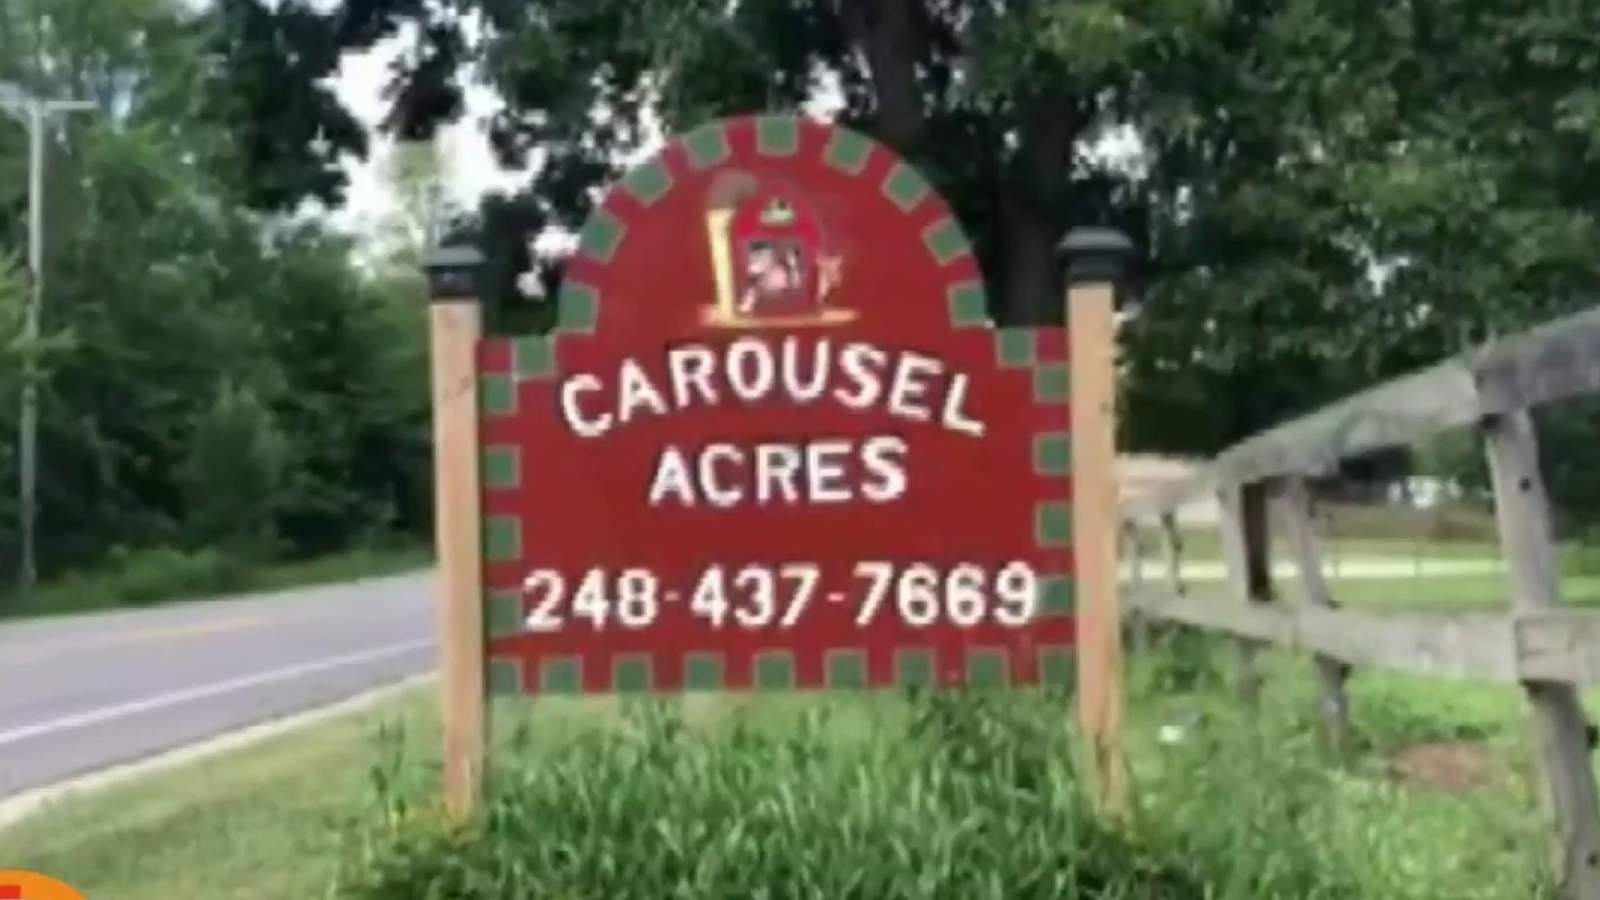 Take a walk on the wild side at Carousel Acres